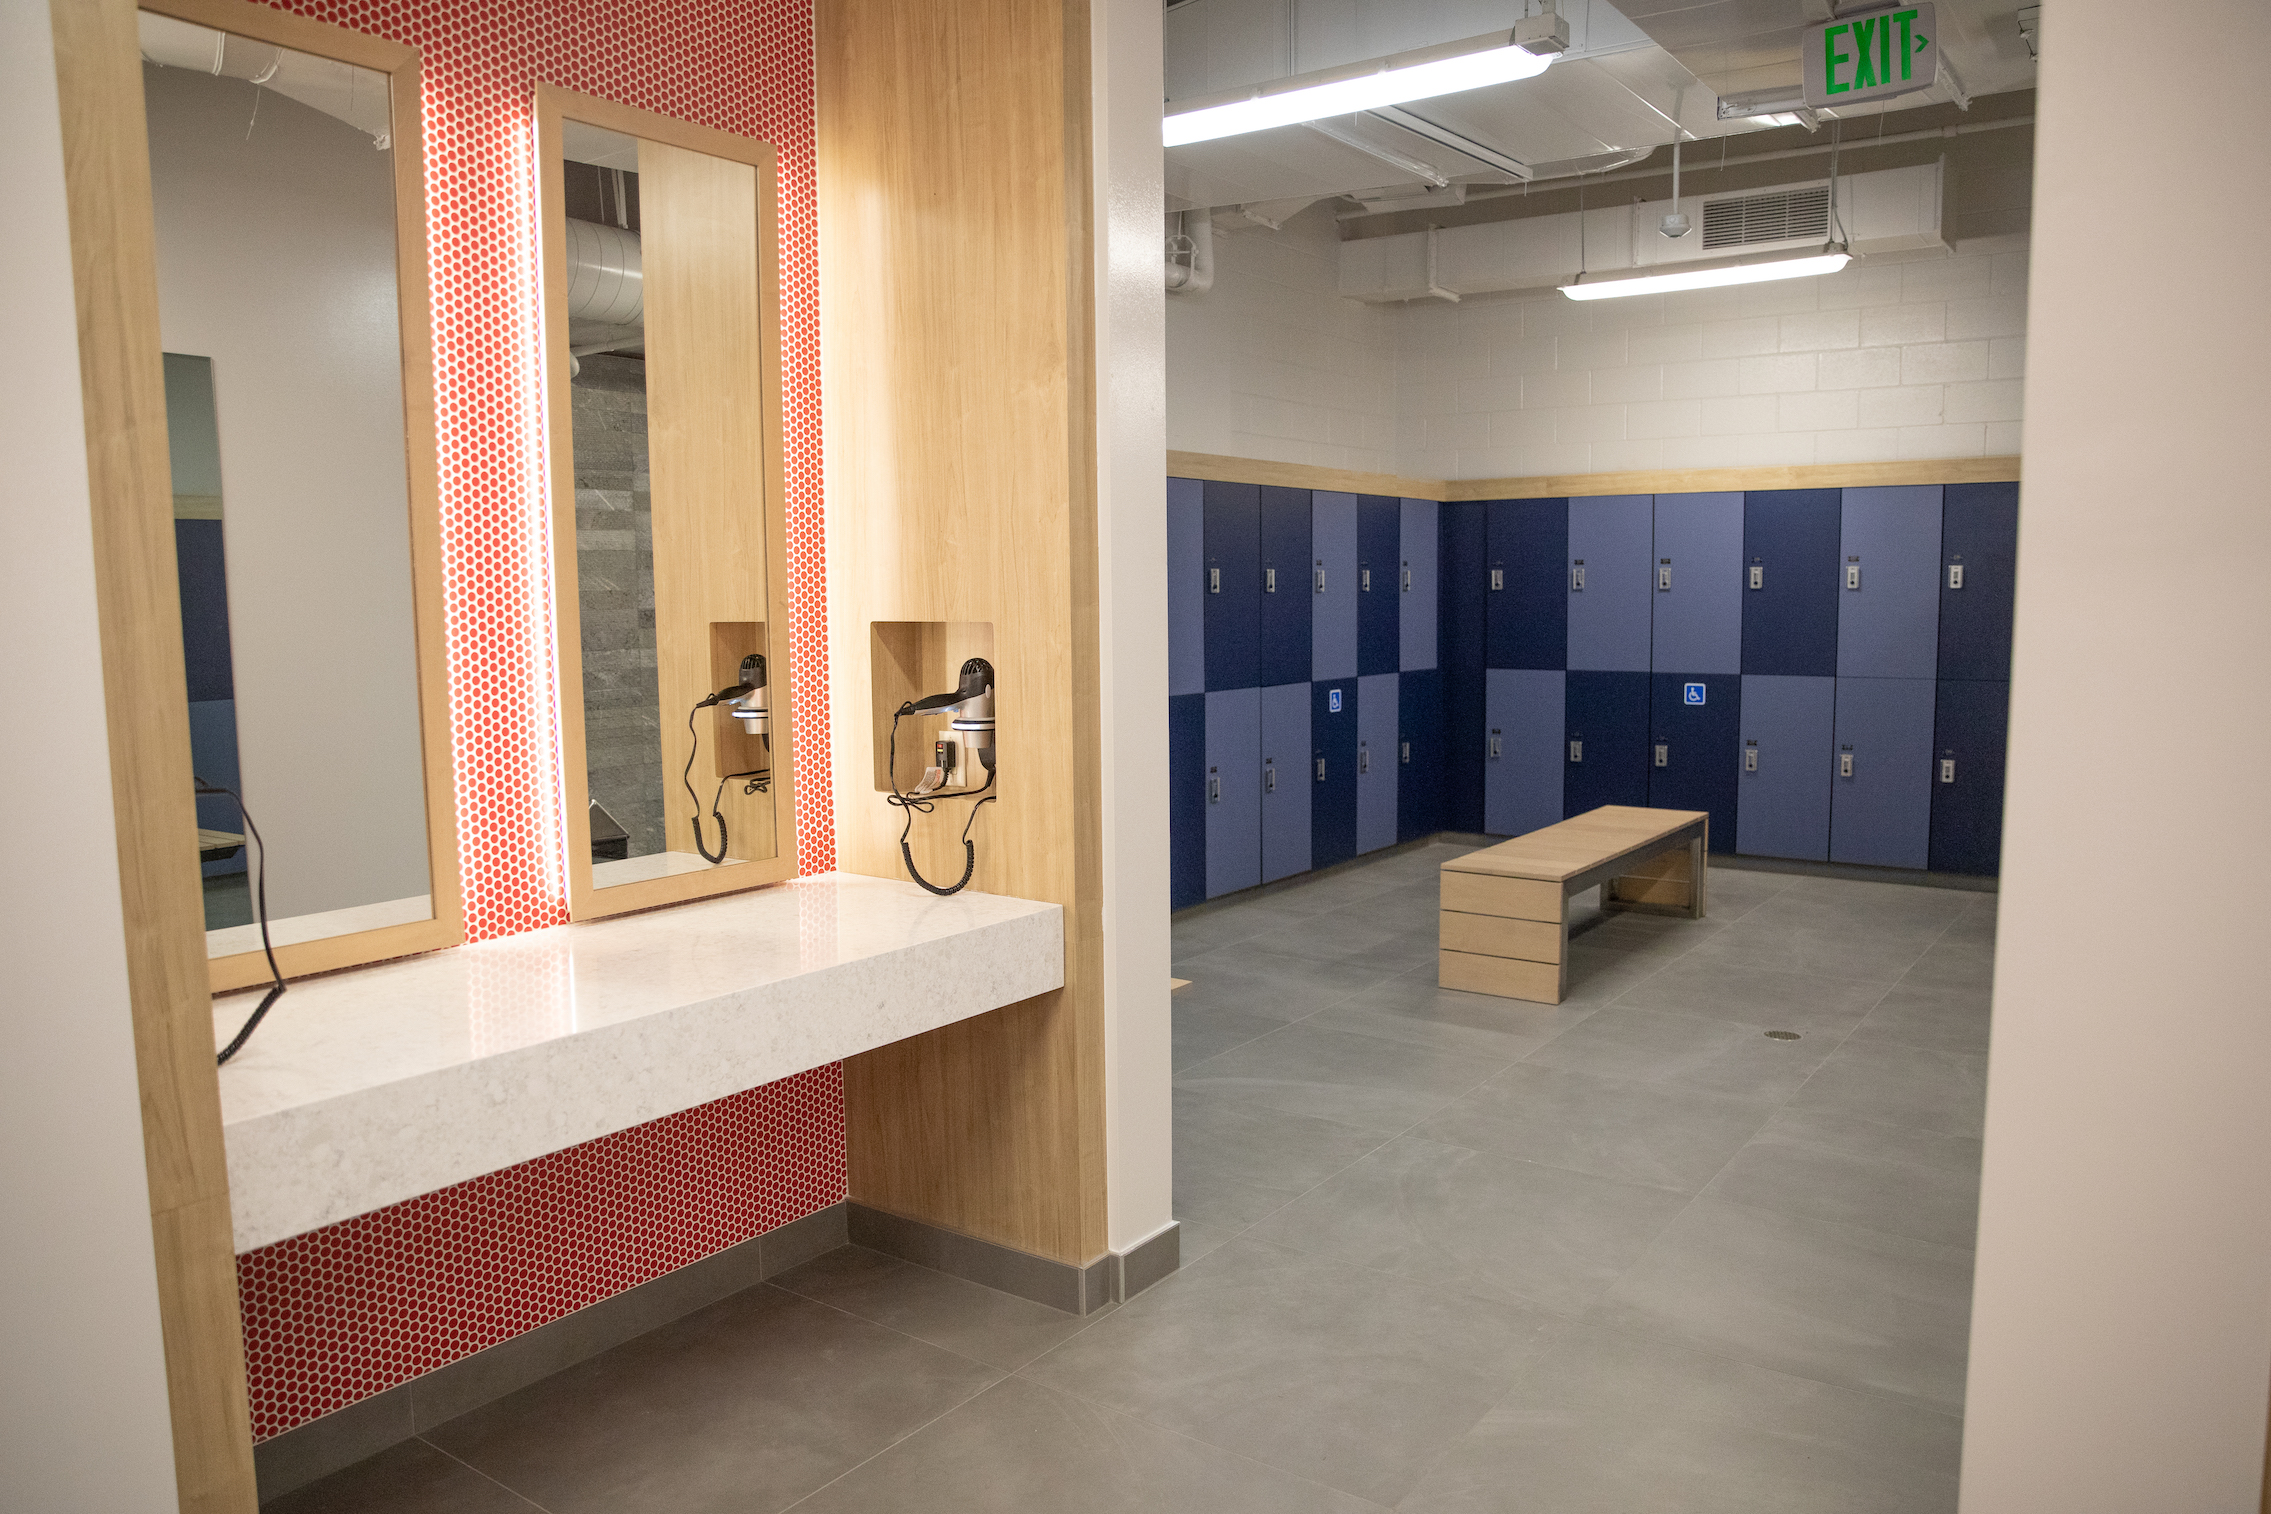 hair dryers, mirrors, lockers and benches